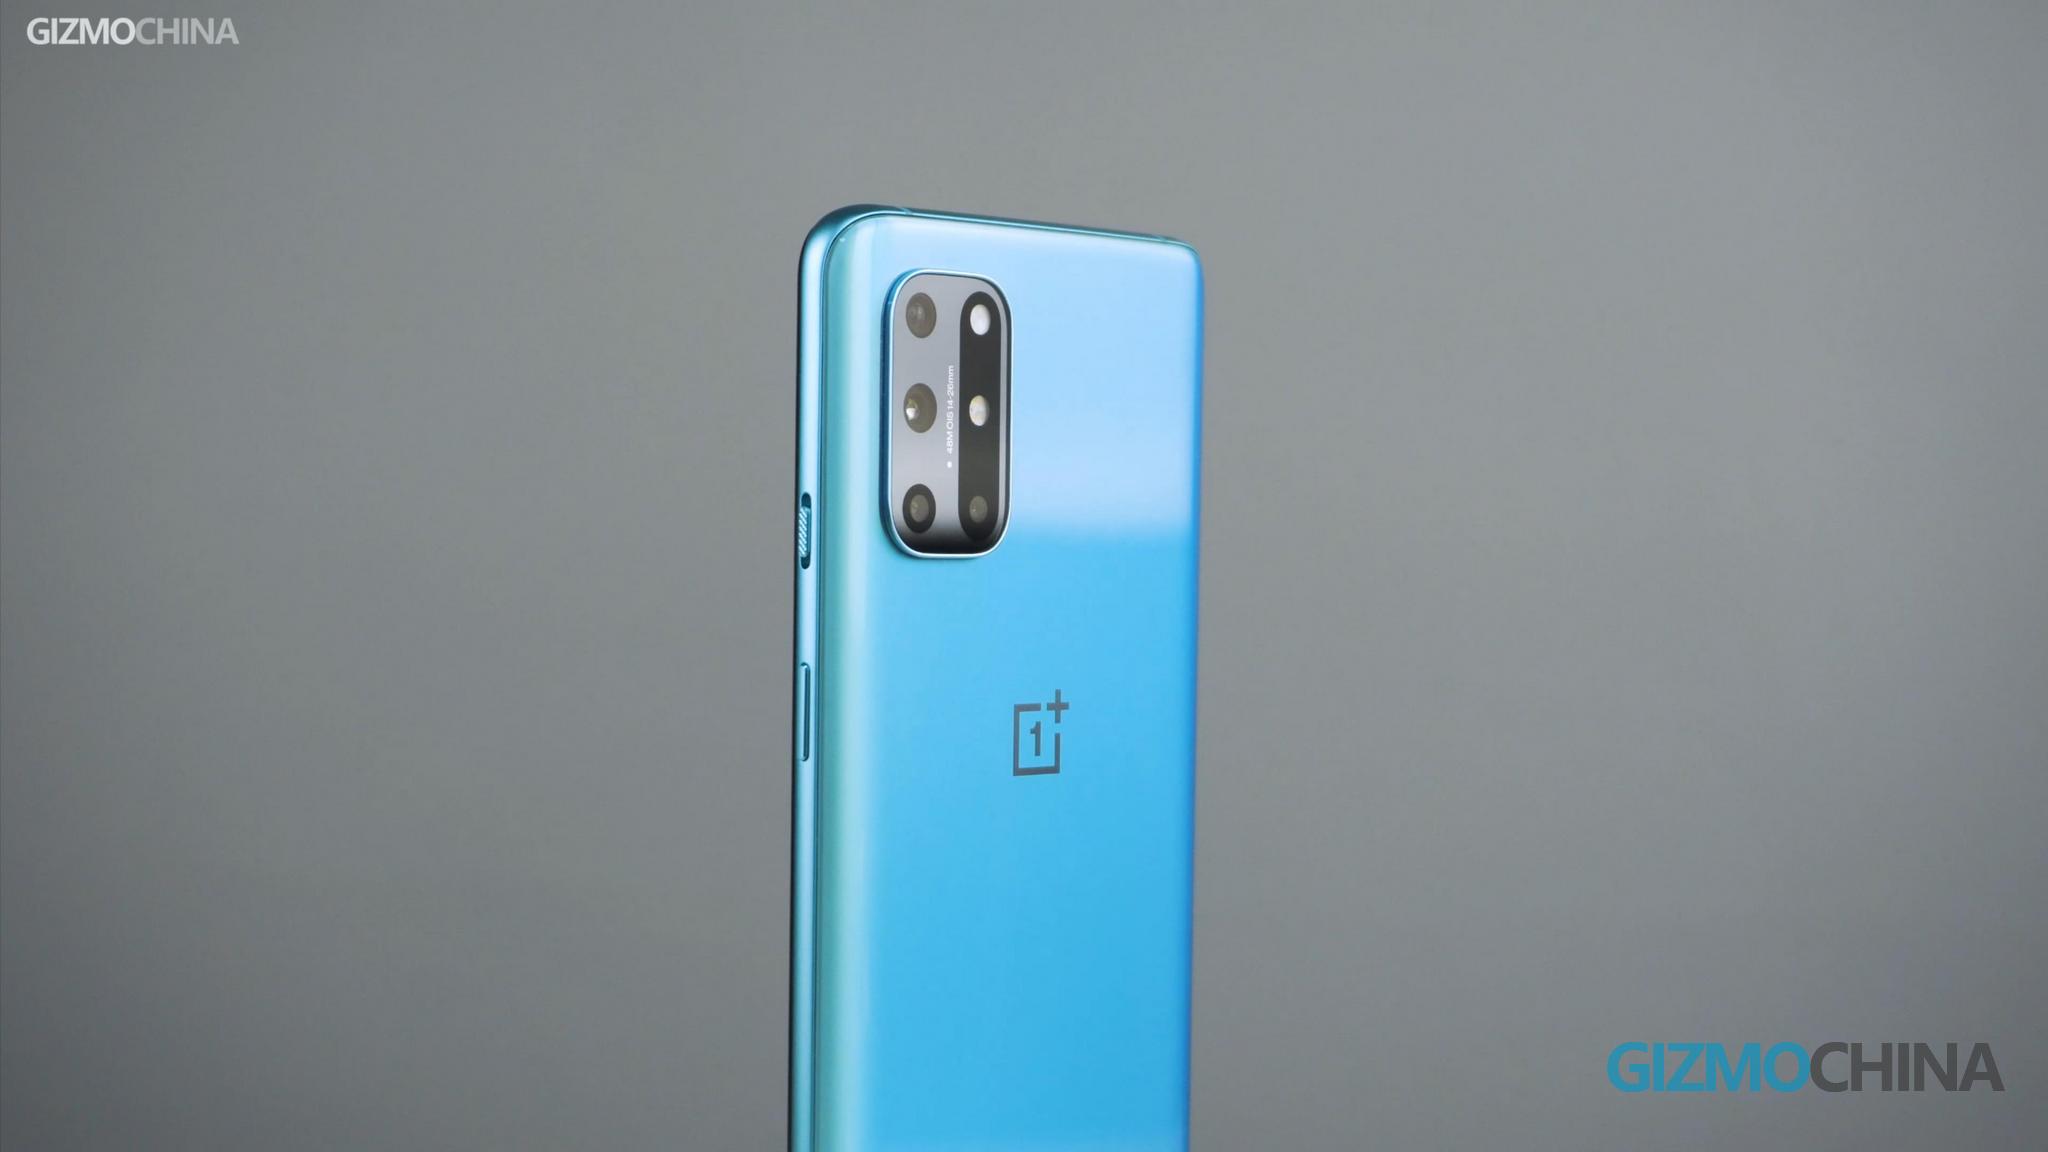 OnePlus 8T Camera scores 111 points in DxOMark test; needs improvement in low-light performance